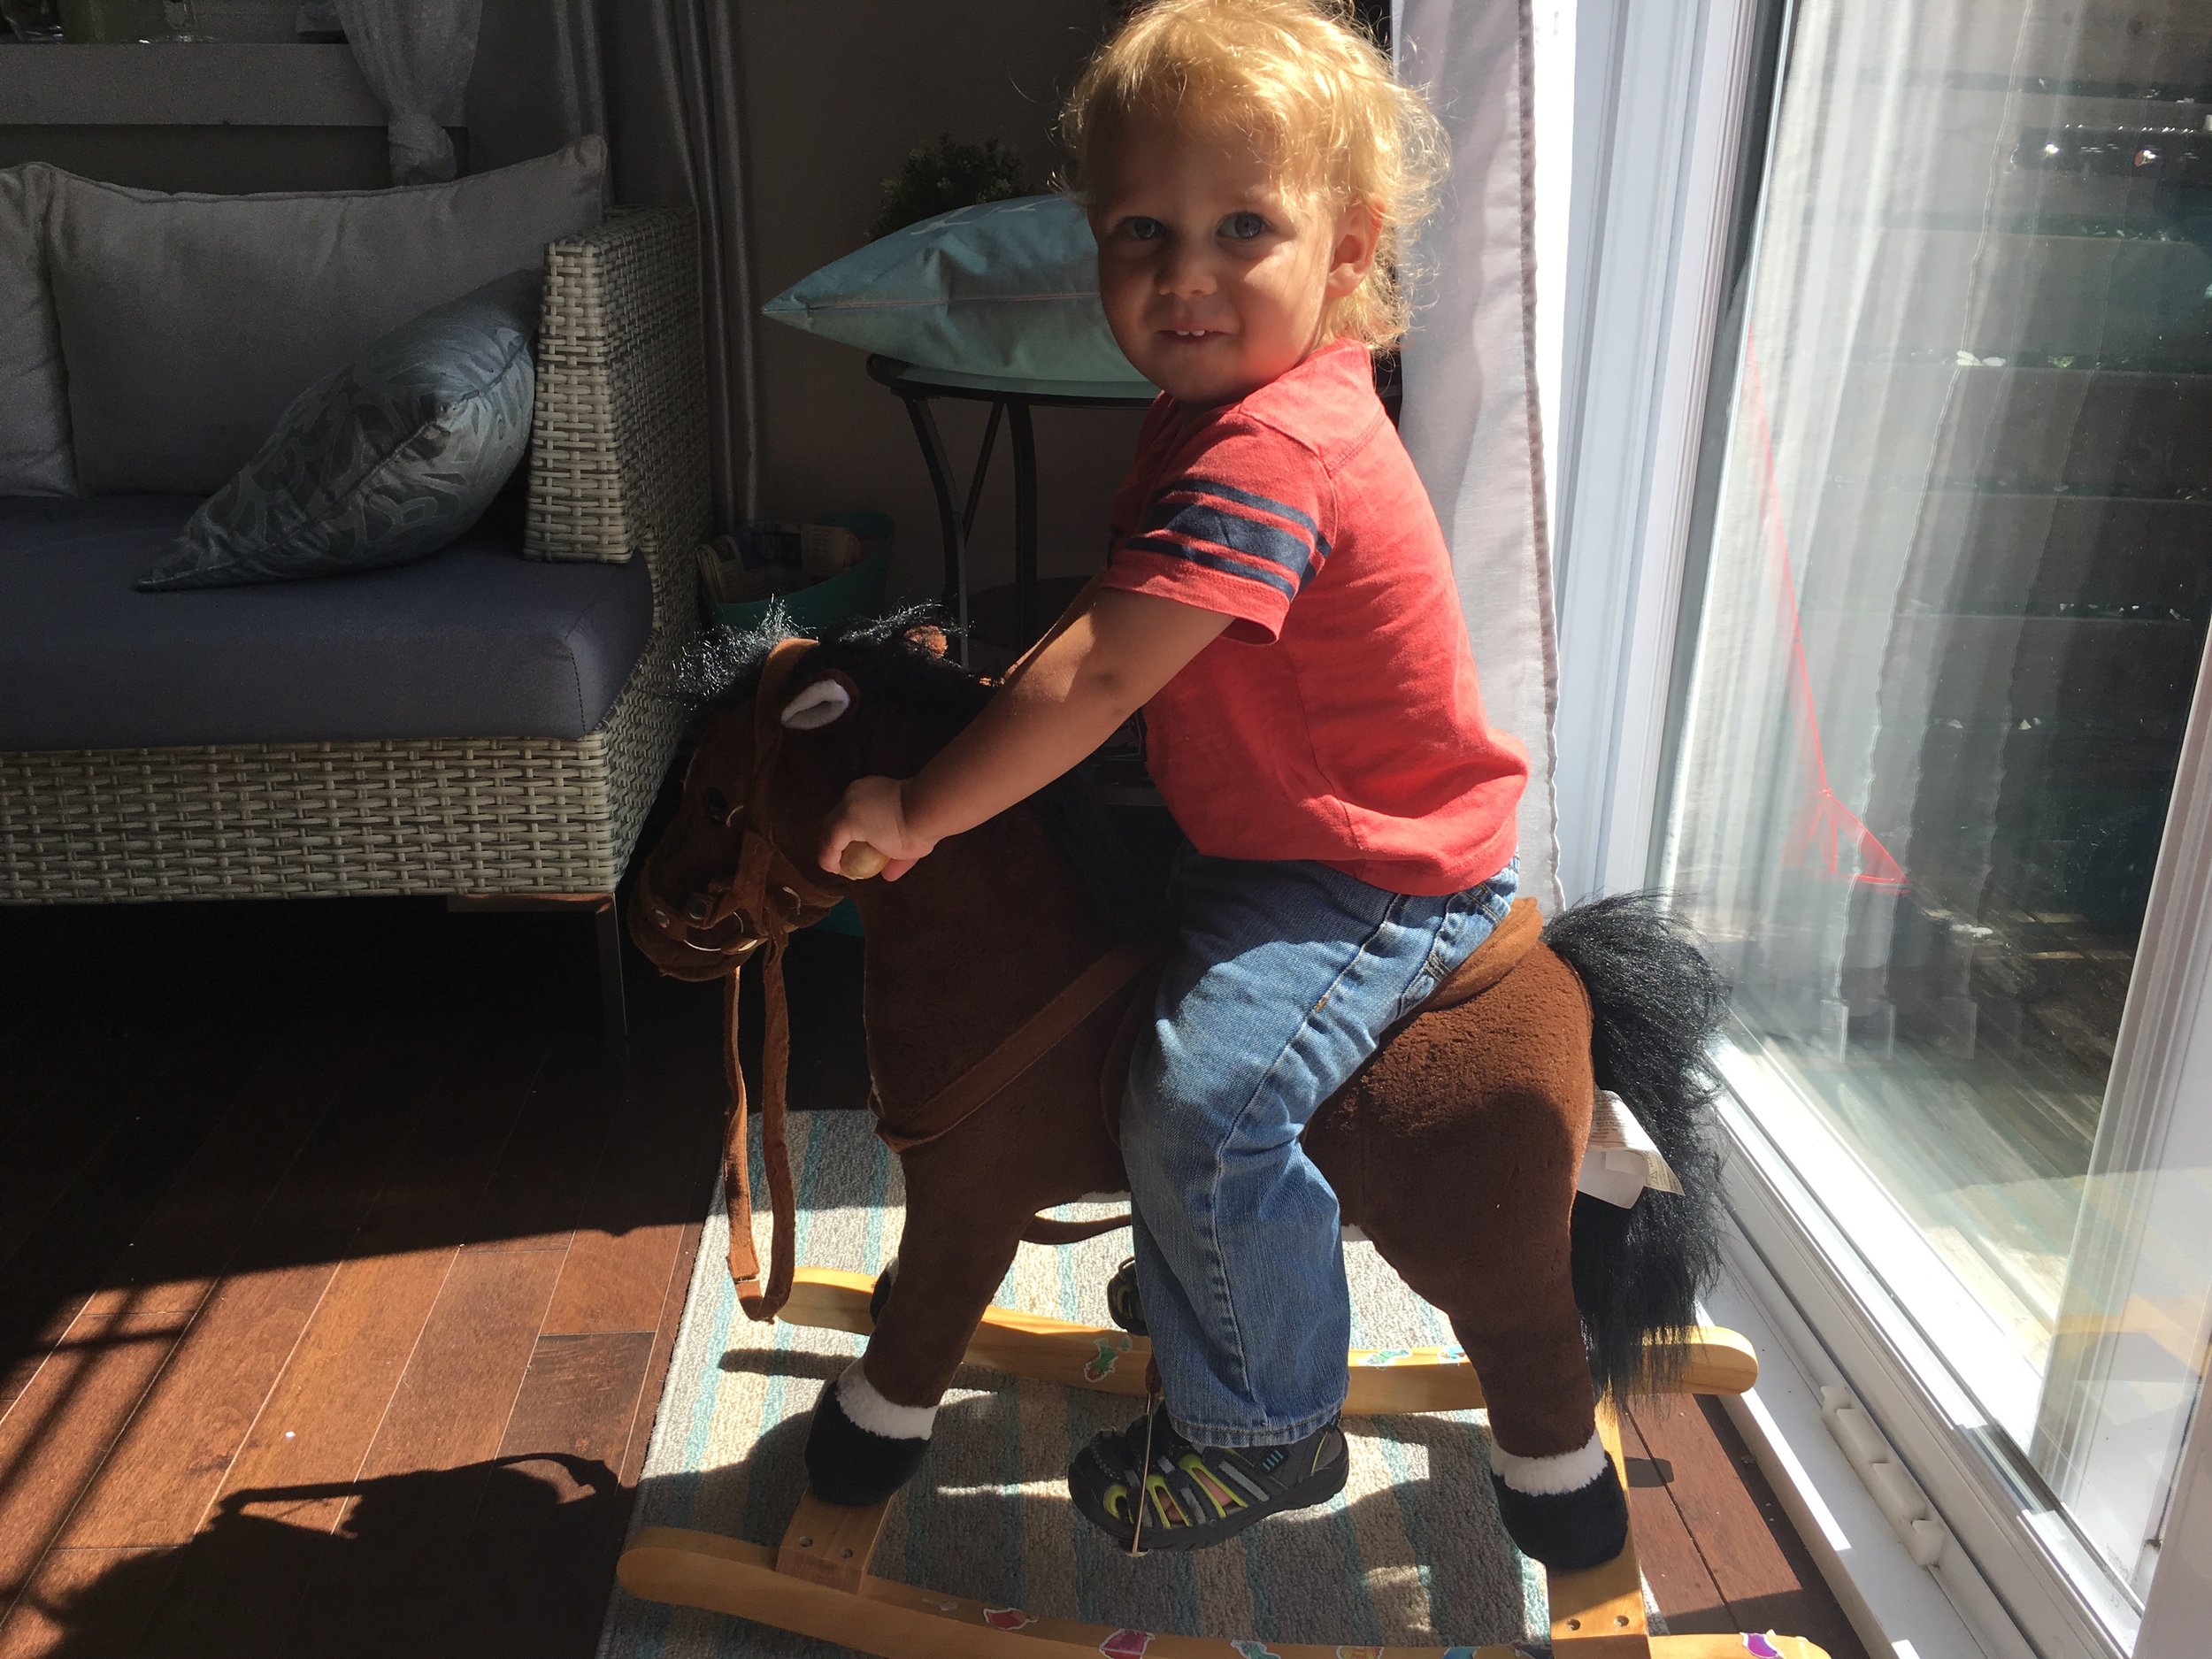 Caleb on his rocking horse, another fun find. 